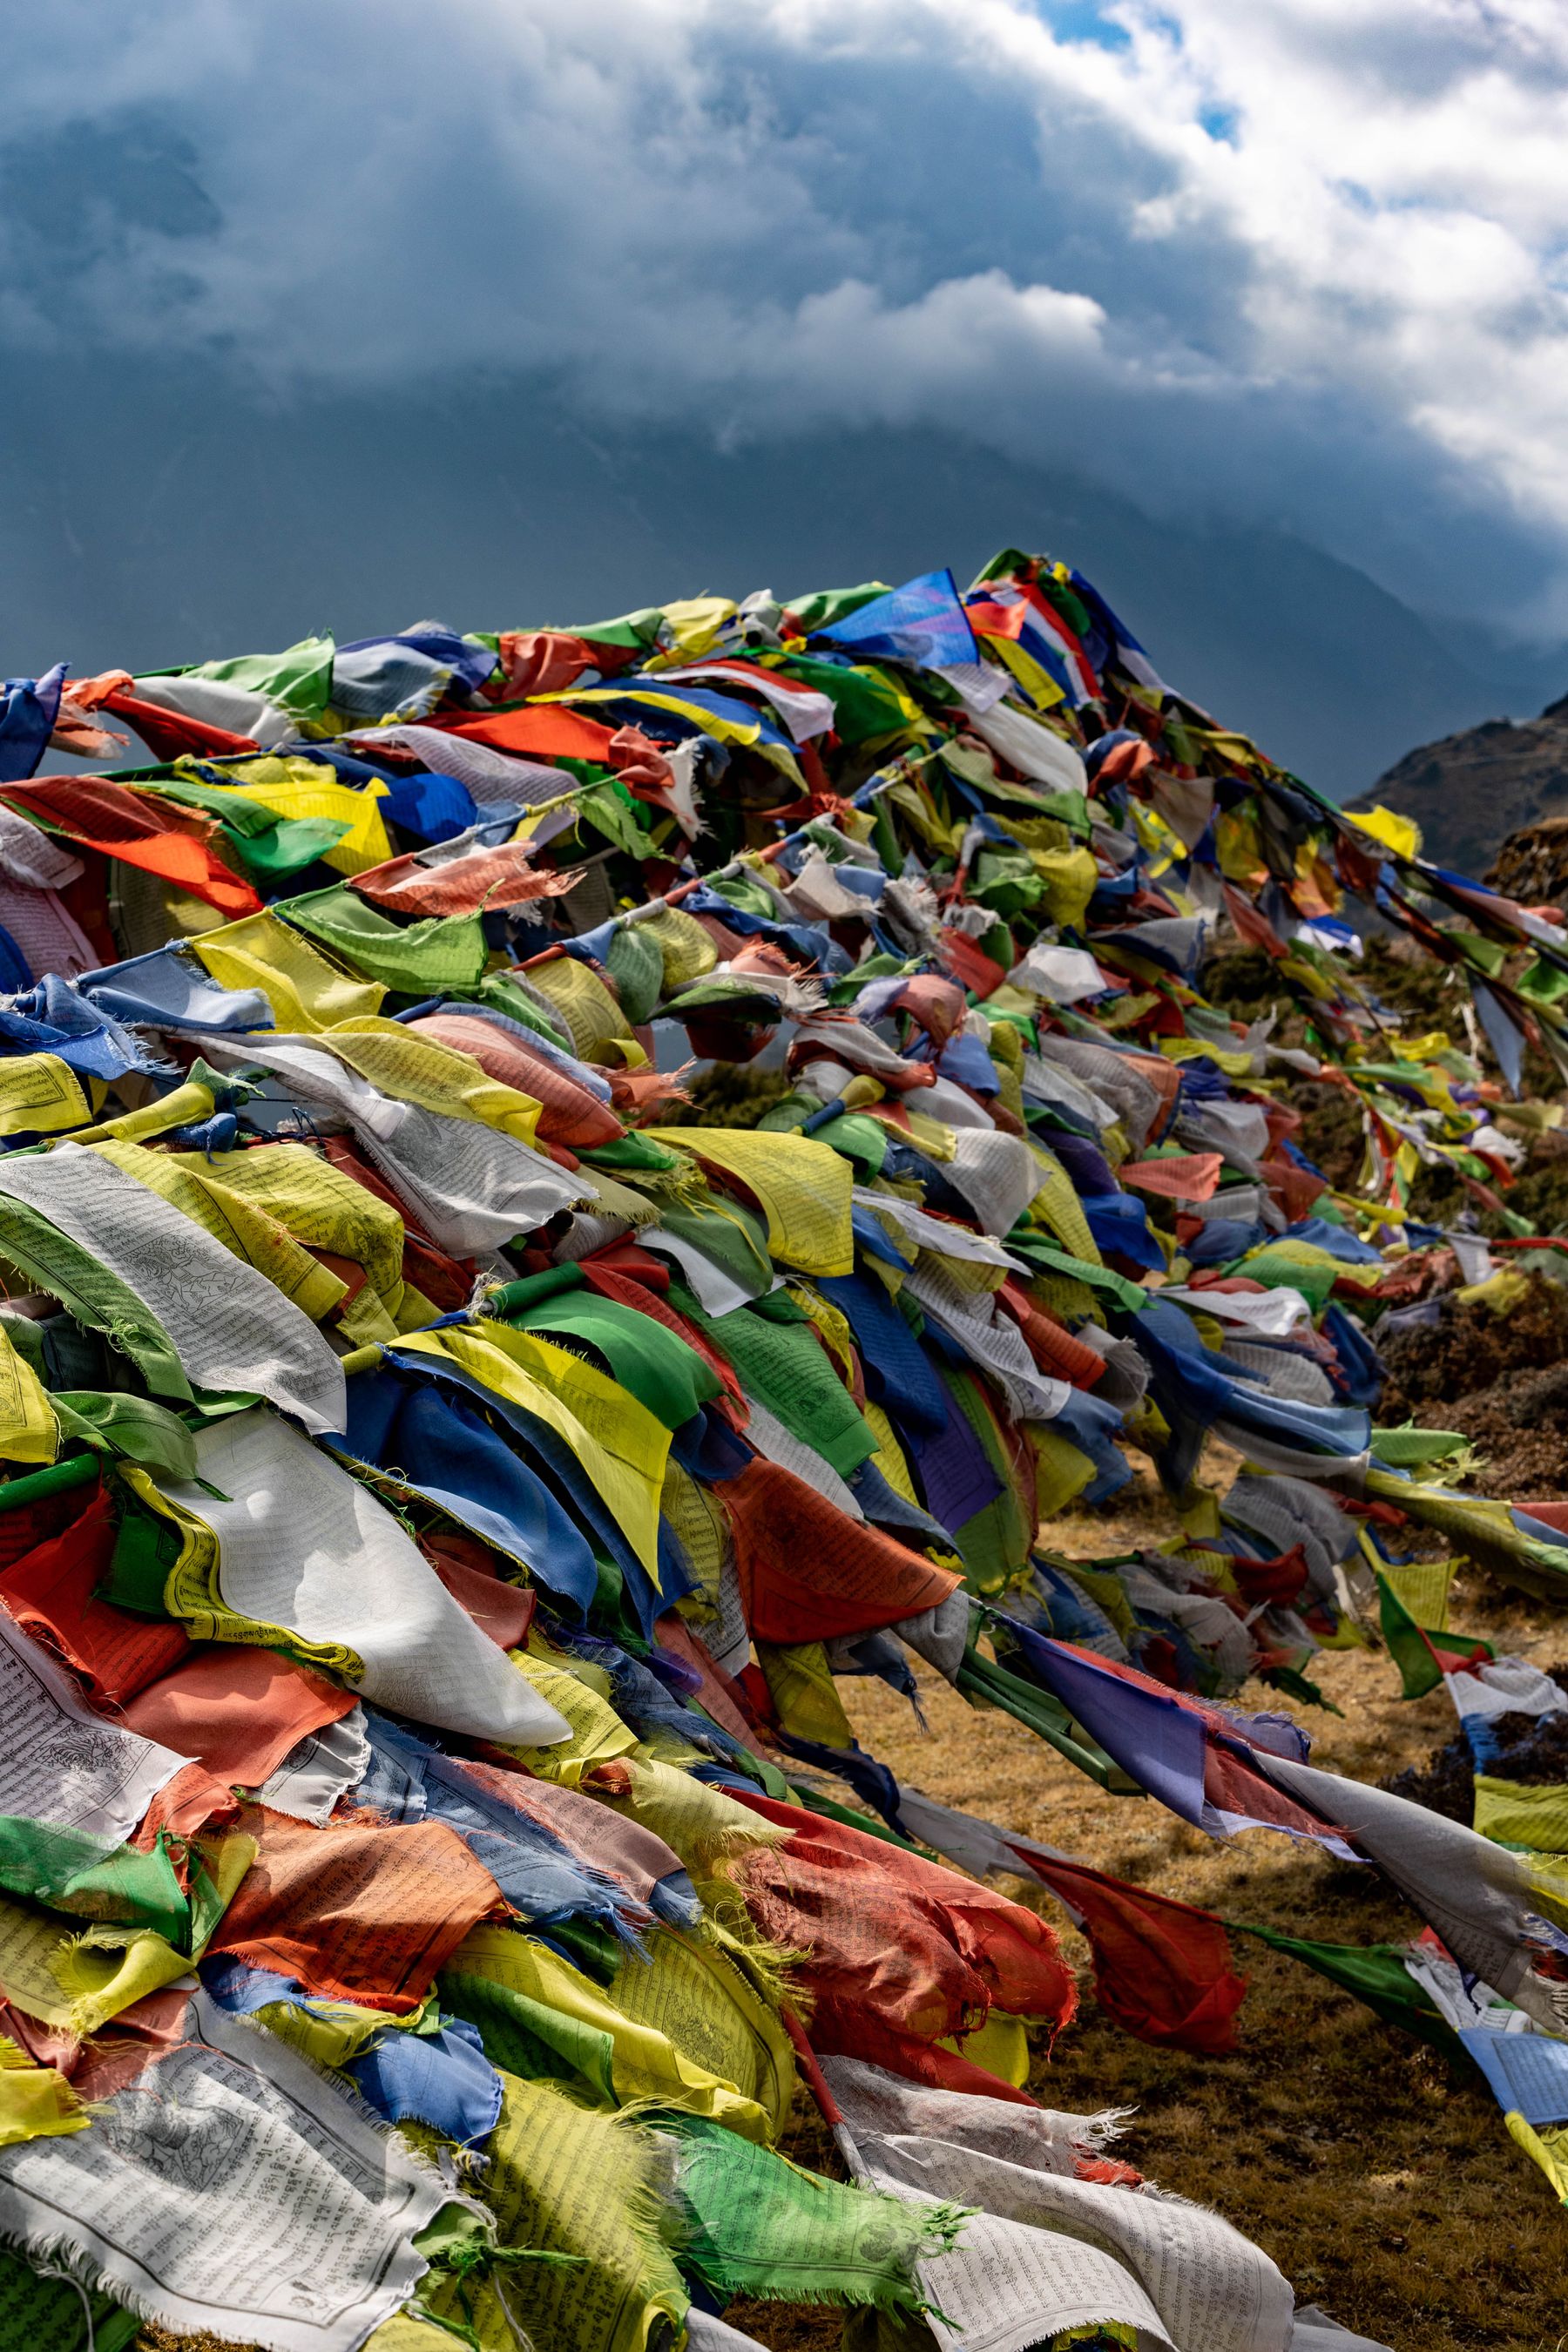 Tibetan Prayer Flags Blowing in a Strong Himalayan Wind